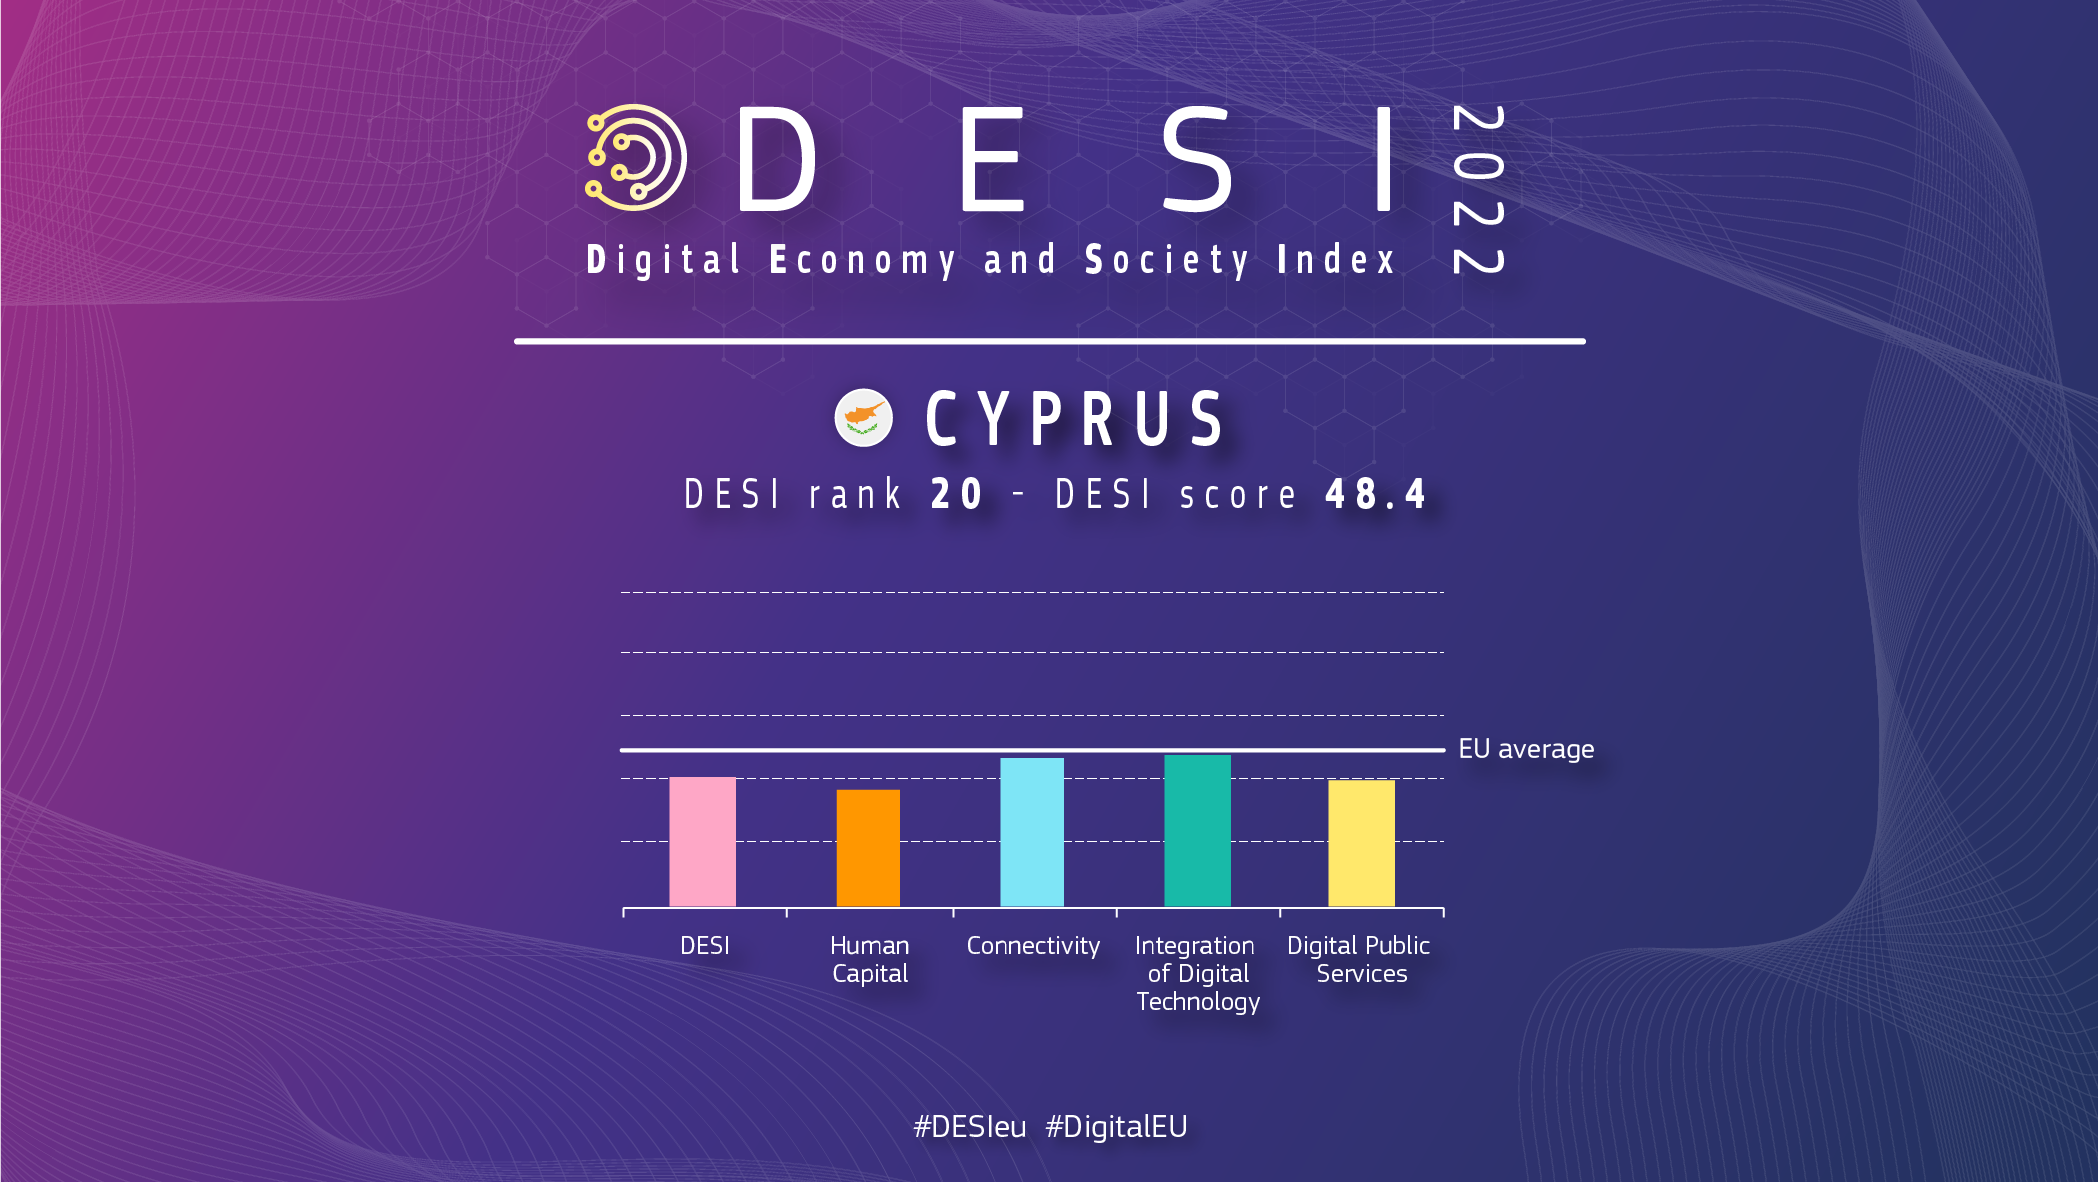 Graphic overview of Cyprus in DESI showing a ranking of 20 and a score of 48.4